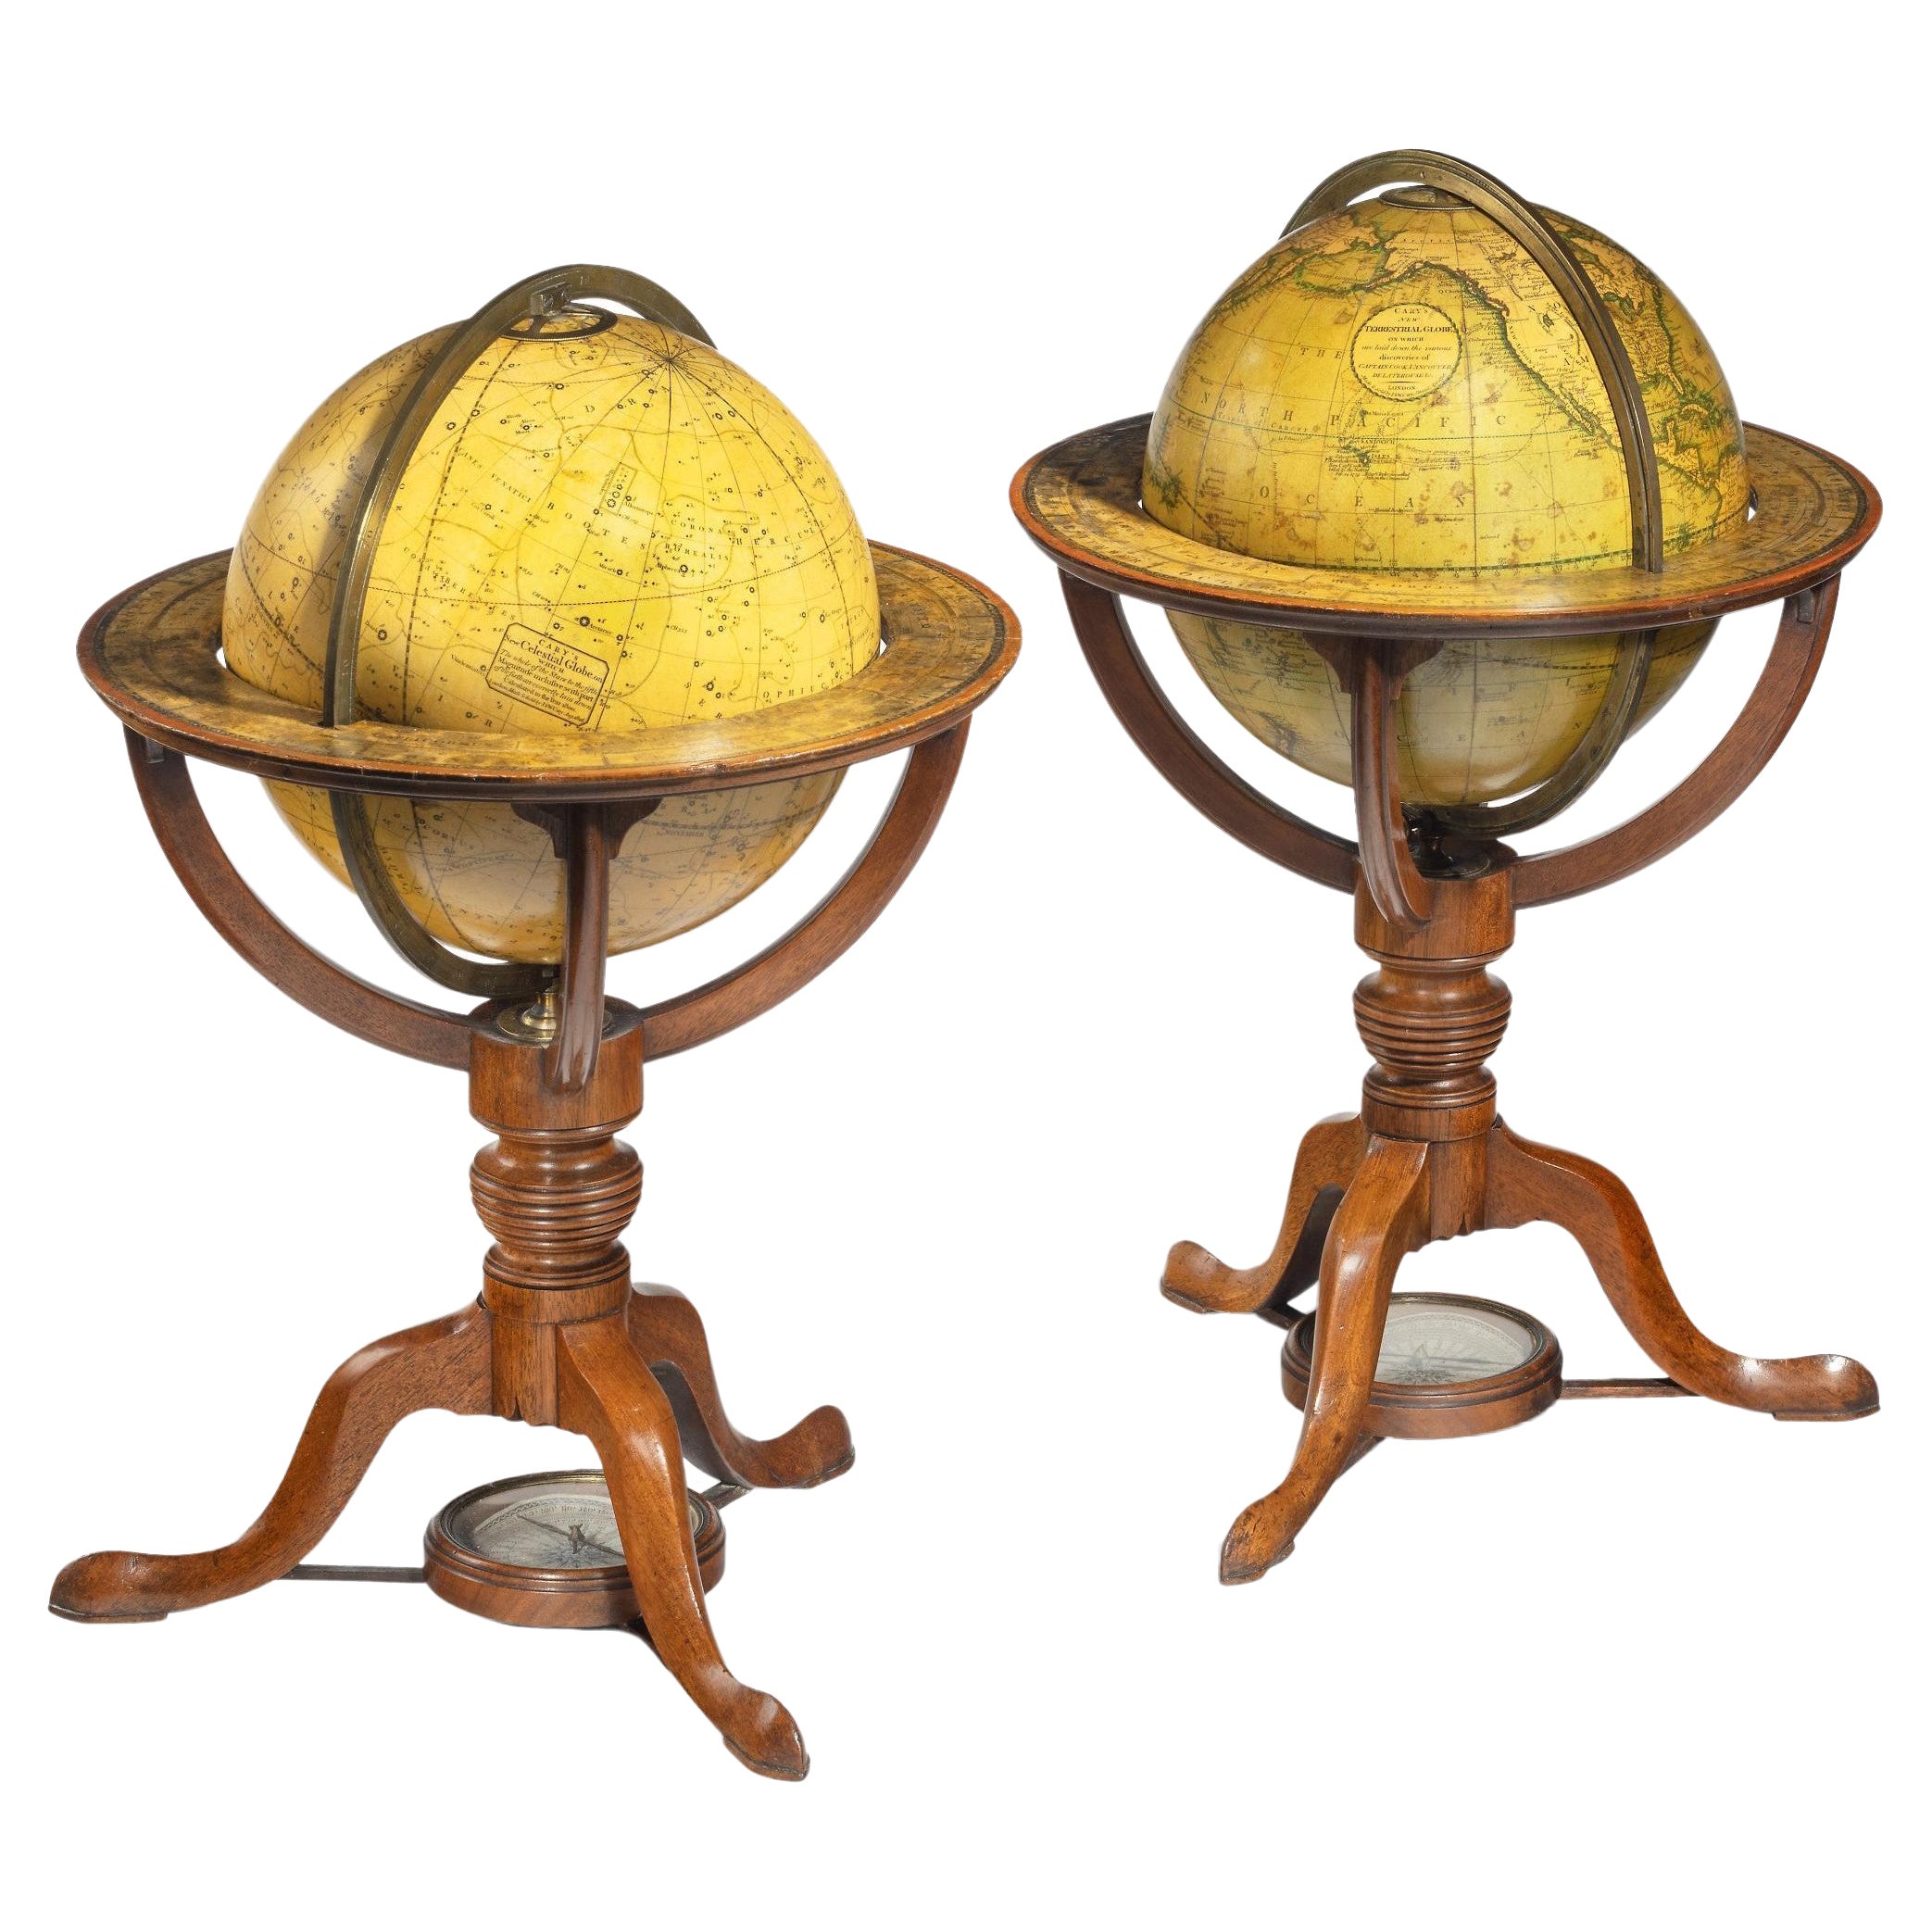 Rare Pair of Table Globes by Cary, Each Dated 1816